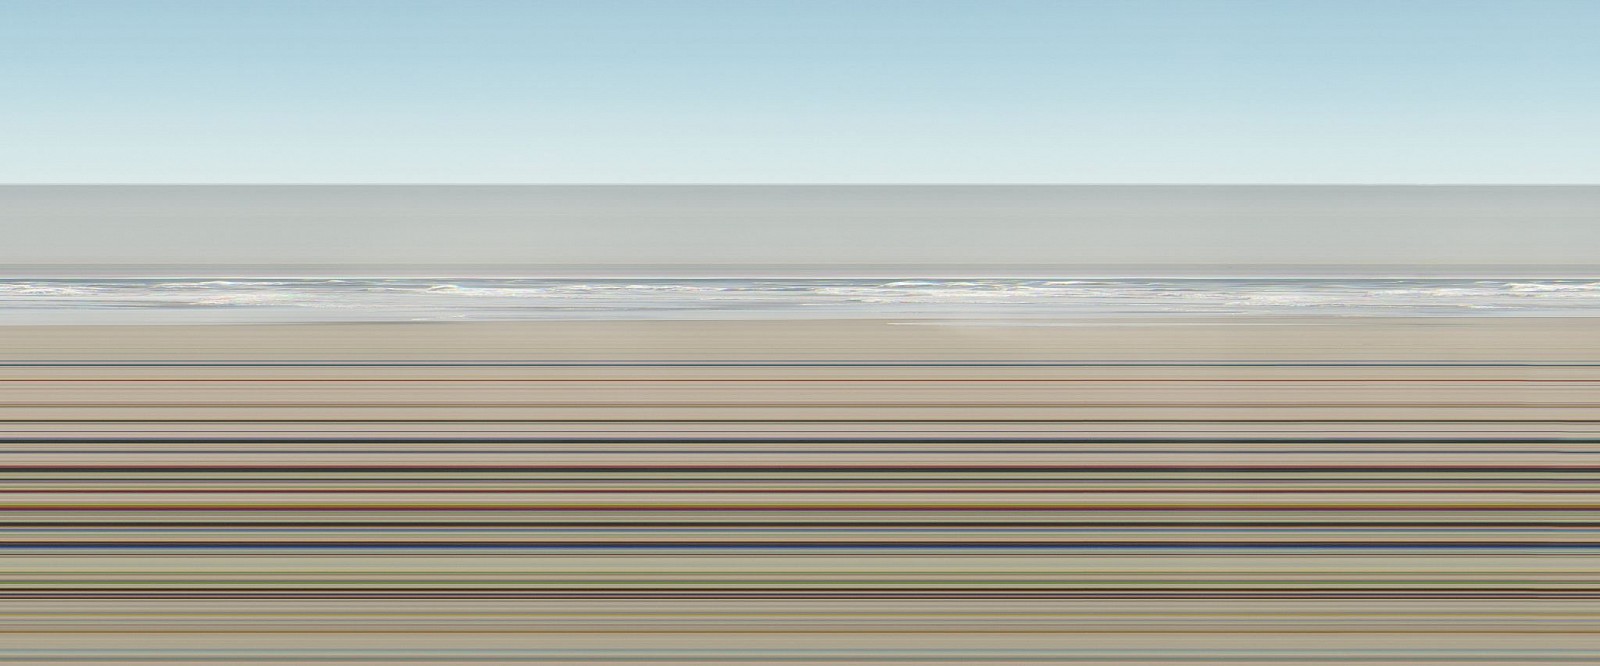 Jay Mark Johnson, POINT DUME WAVES #9, 2006 Malibu CA
archival pigment on paper, mounted on aluminum, 40 x 96 in. (101.6 x 243.8 cm)